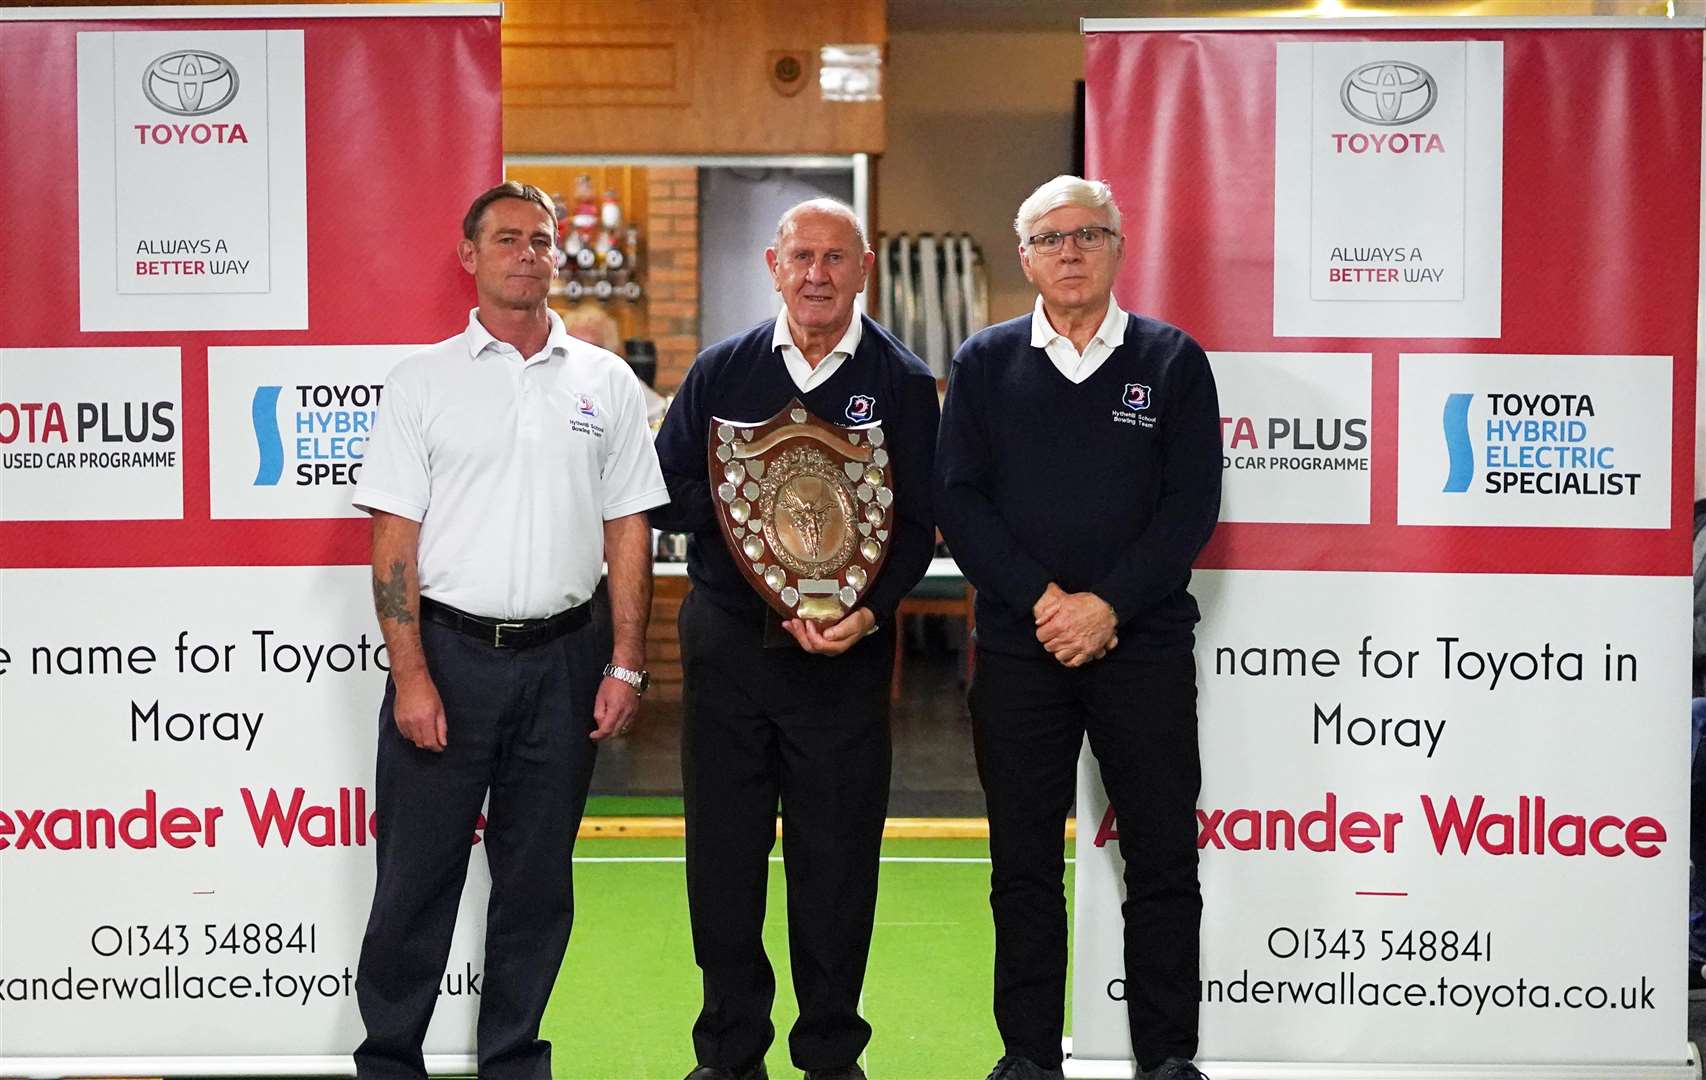 Lossiemouth won their first ever championship shield in the 19-20 season with Norman Grant pictured with the Division 2 trophy along with Kevin Donaldson (left) and Peter Bloomfield. Photo: Daph Bloomfield.